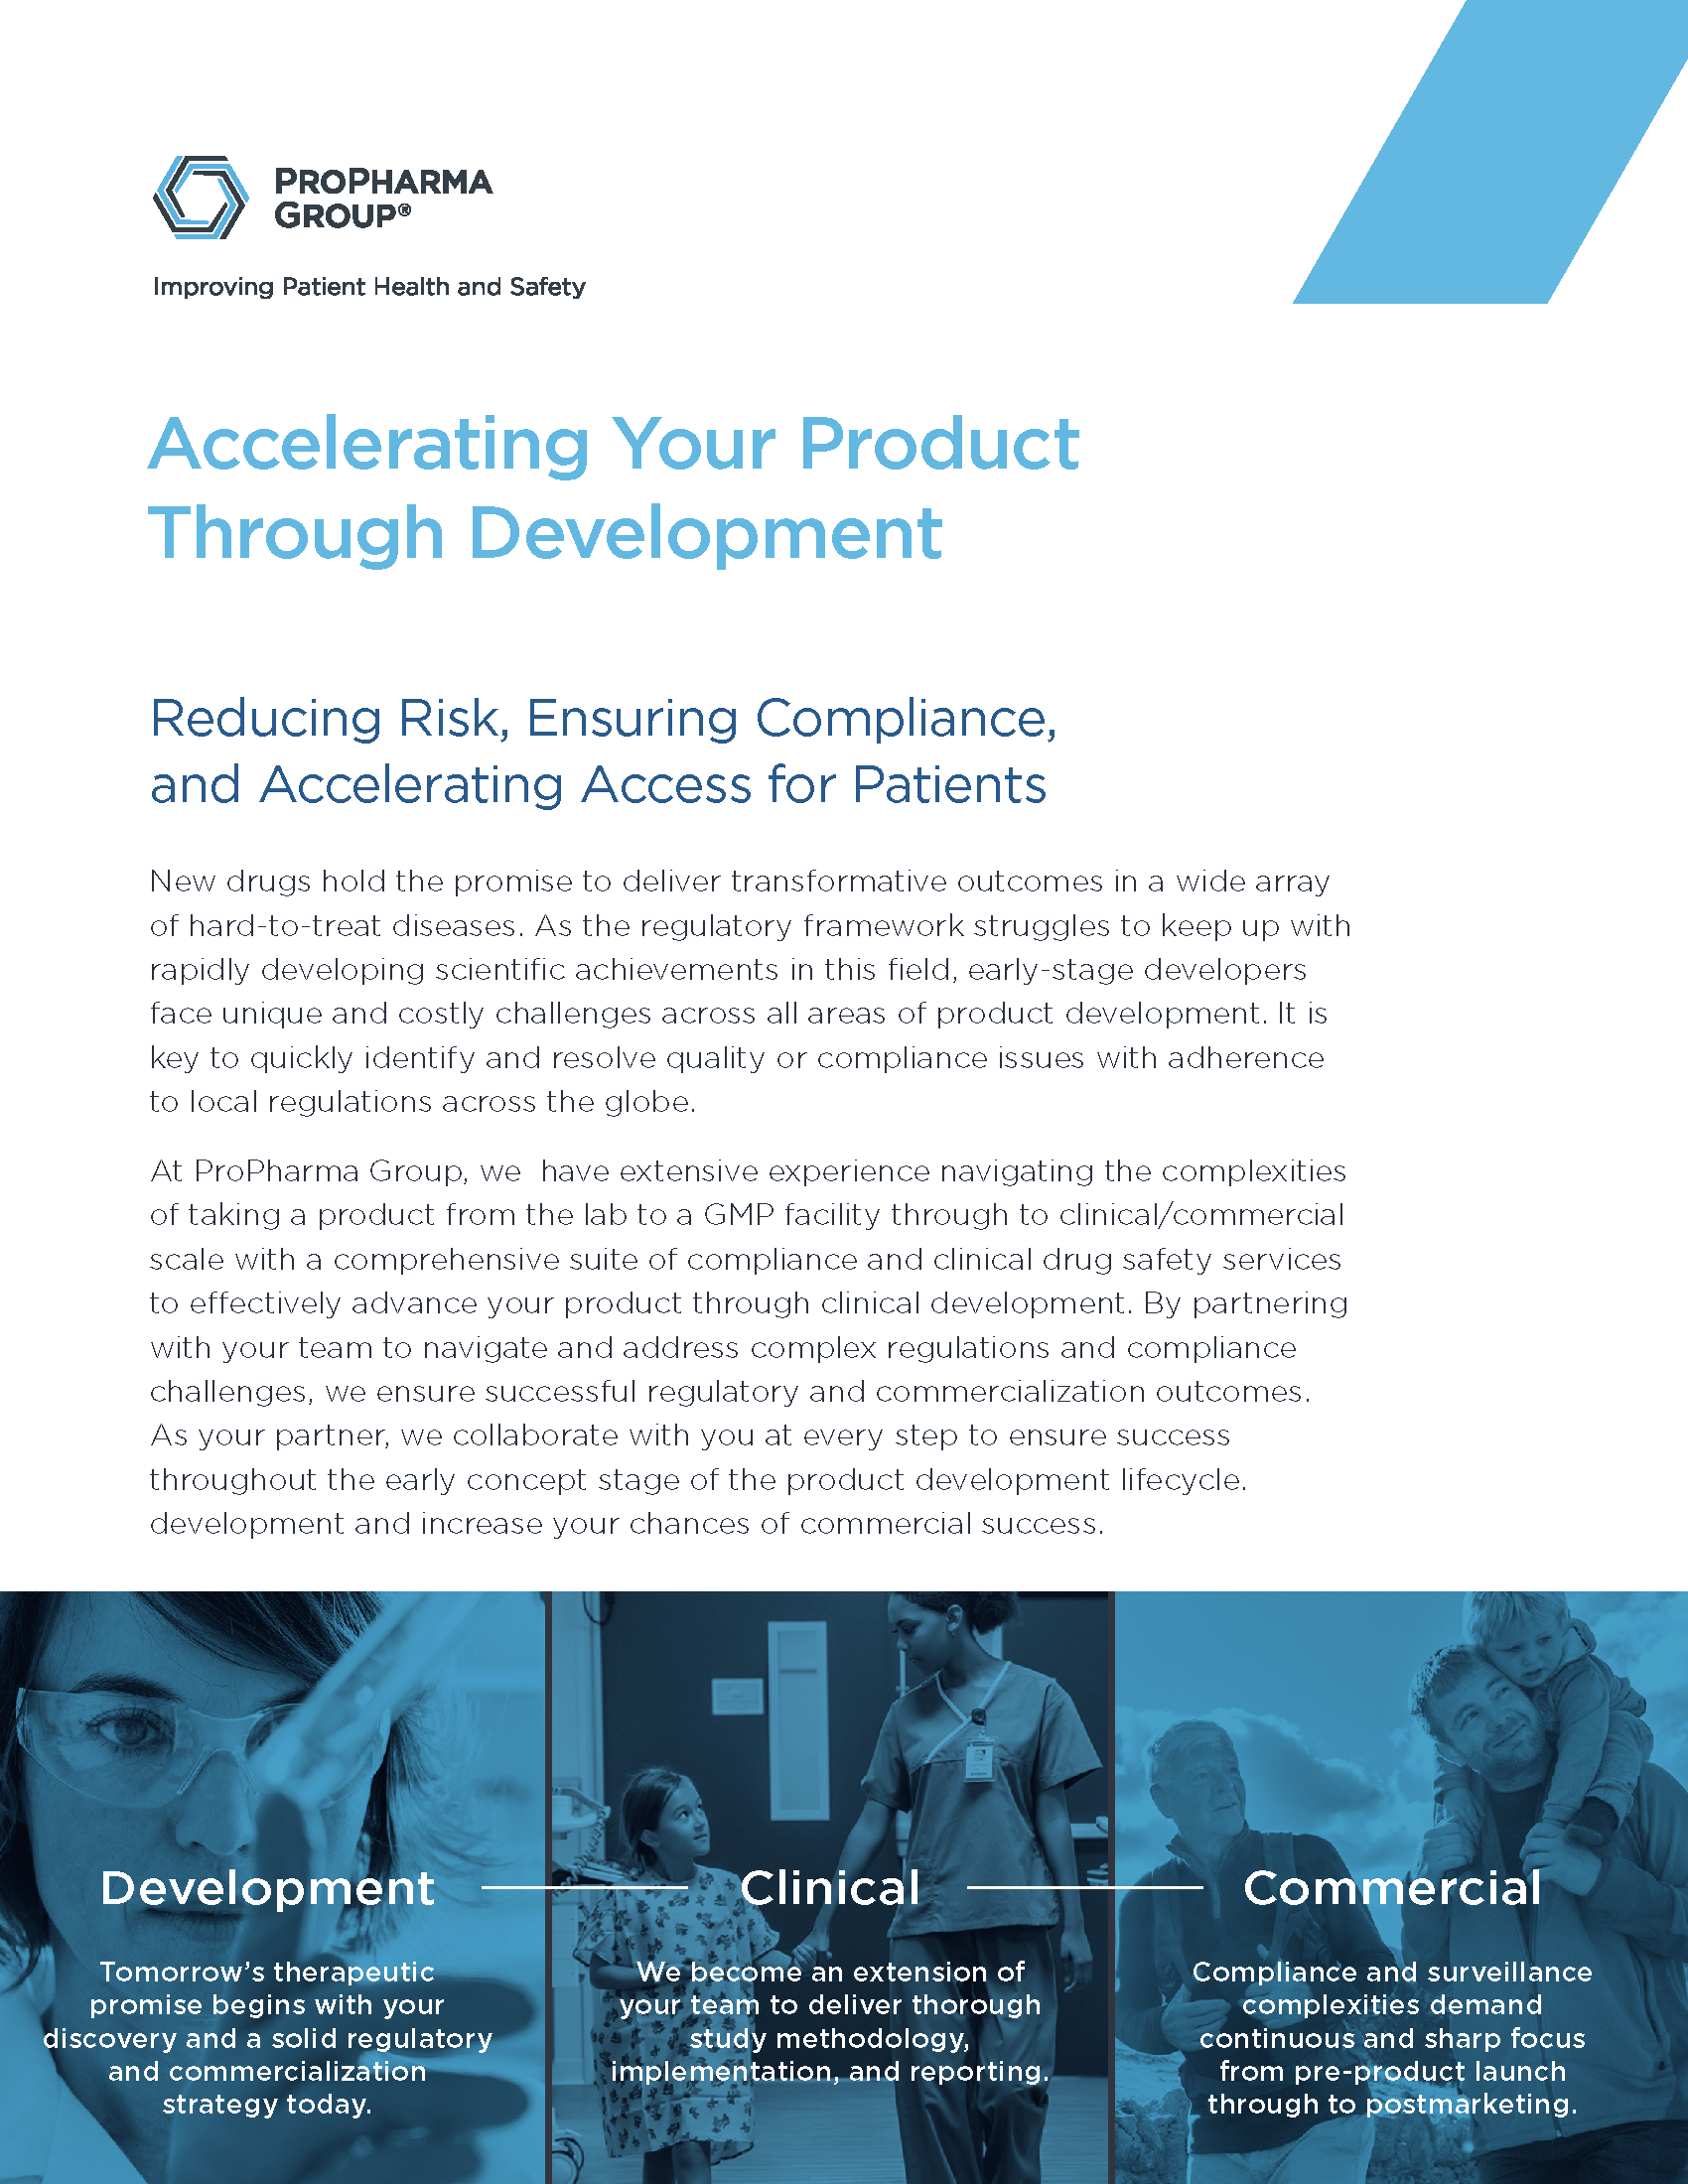 Accelerating Your Product Through Drug Development - ProPharma